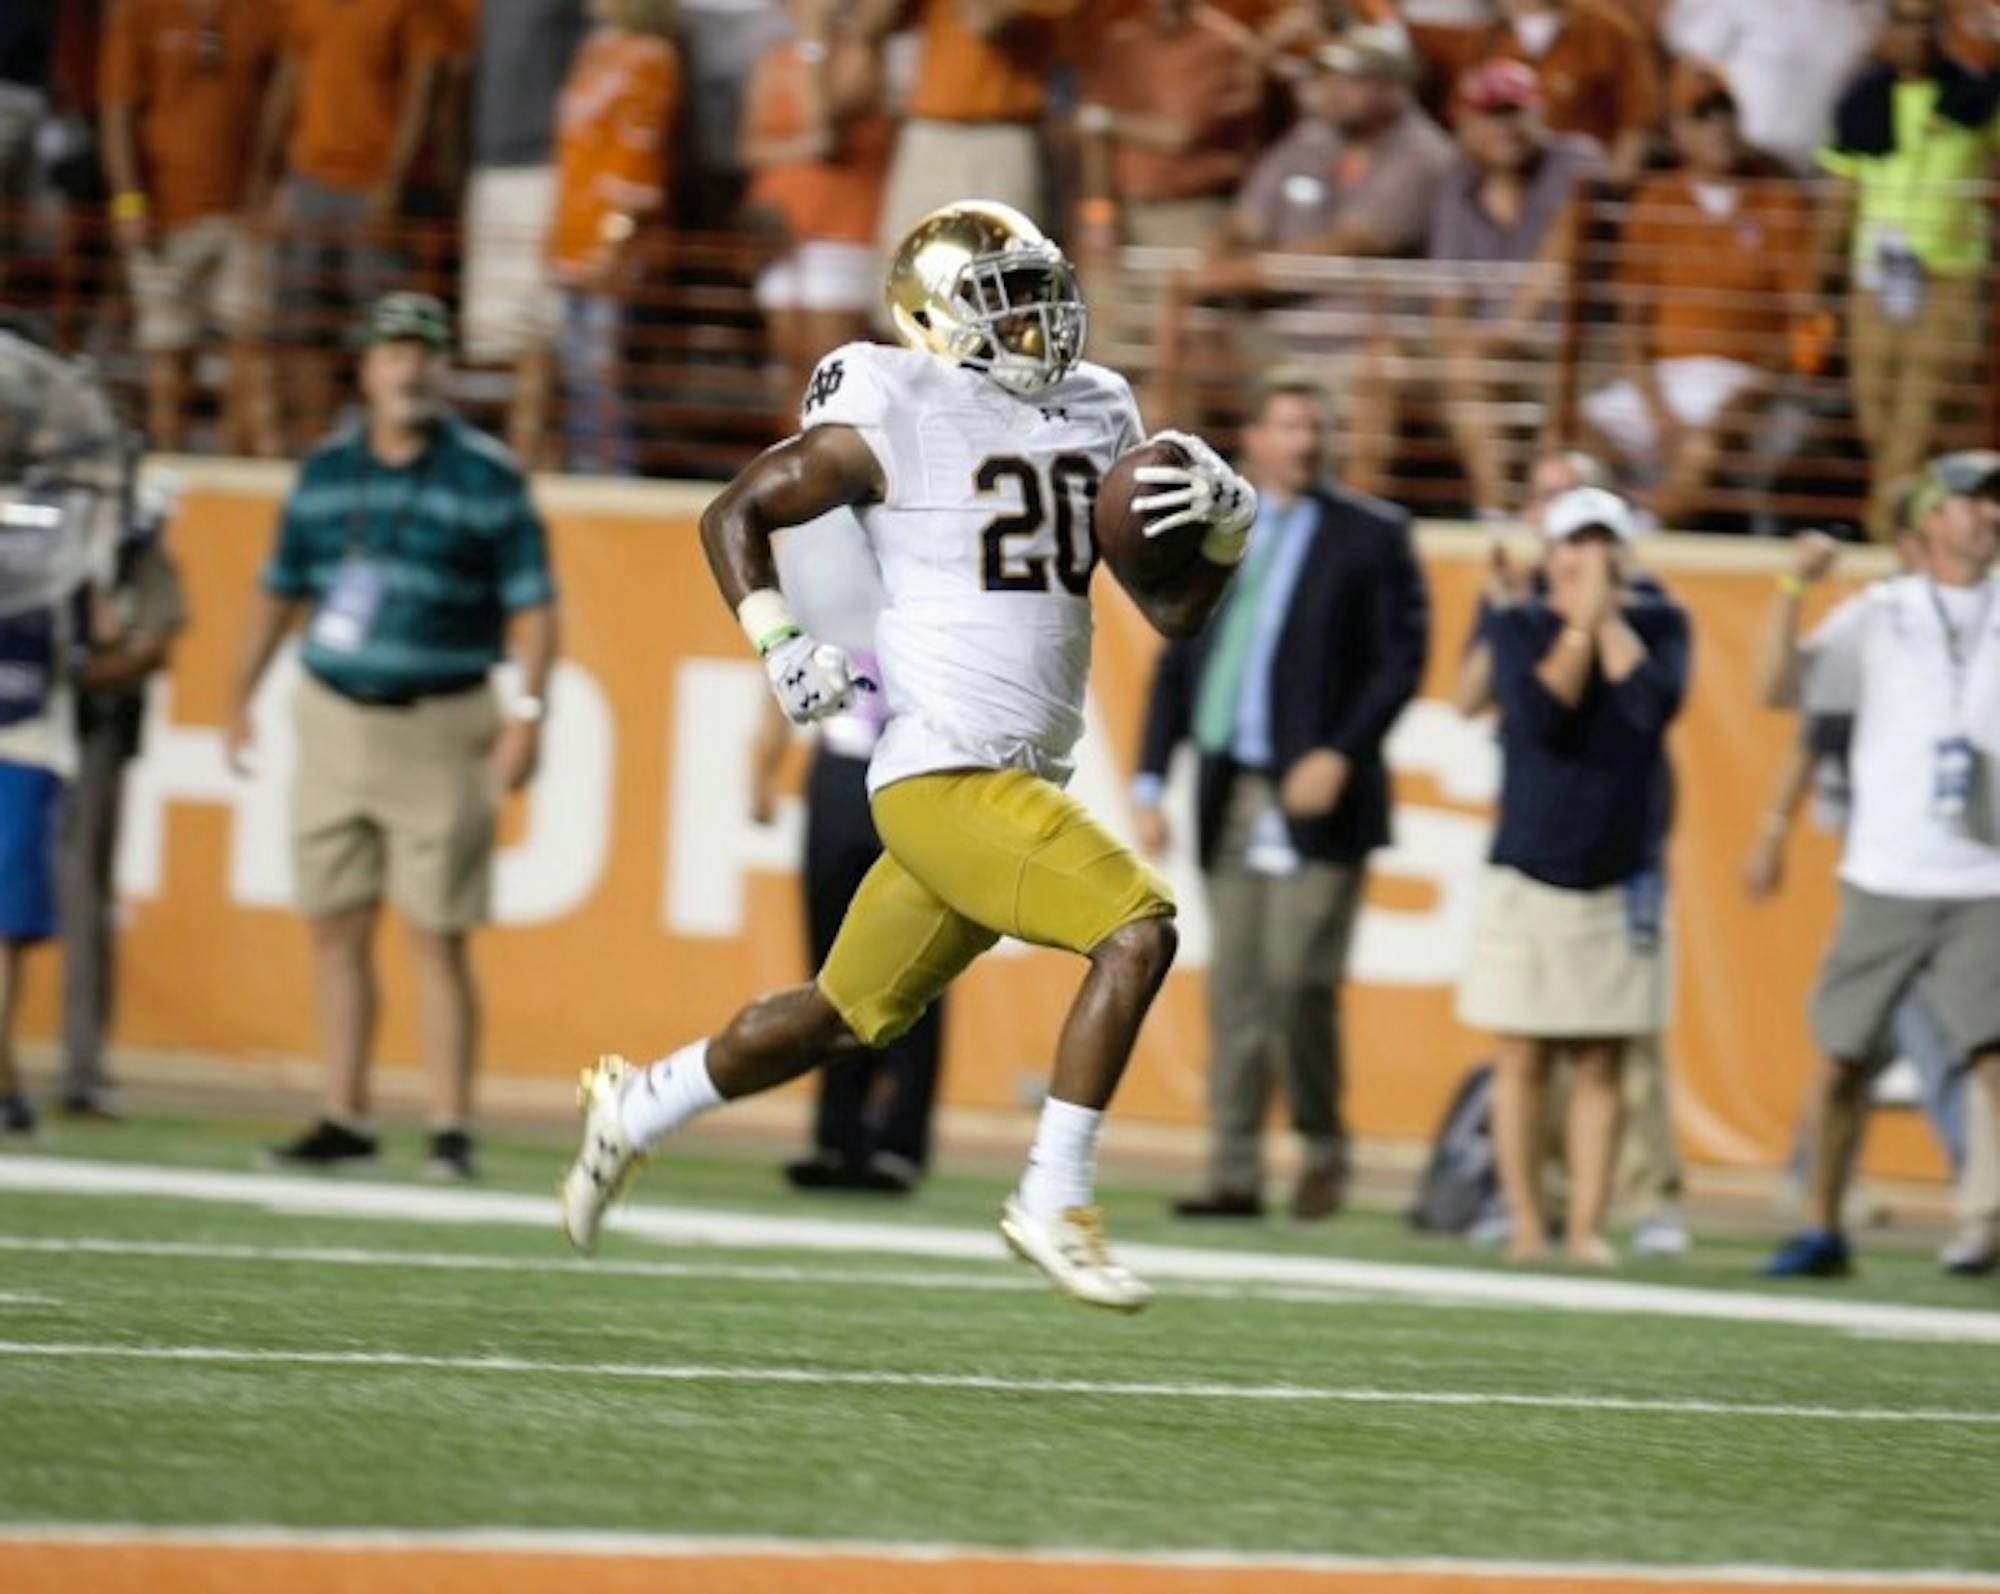 Irish sophomore cornerback Shaun Crawford returns a blocked extra-point attempt for two points in the fourth quarter of Notre Dame’s 50-47 loss against Texas on Sunday at Darrell K. Royal-Texas Memorial Stadium. Crawford’s return tied the score at 37 with 3:29 remaining in the game, pushing it into overtime.